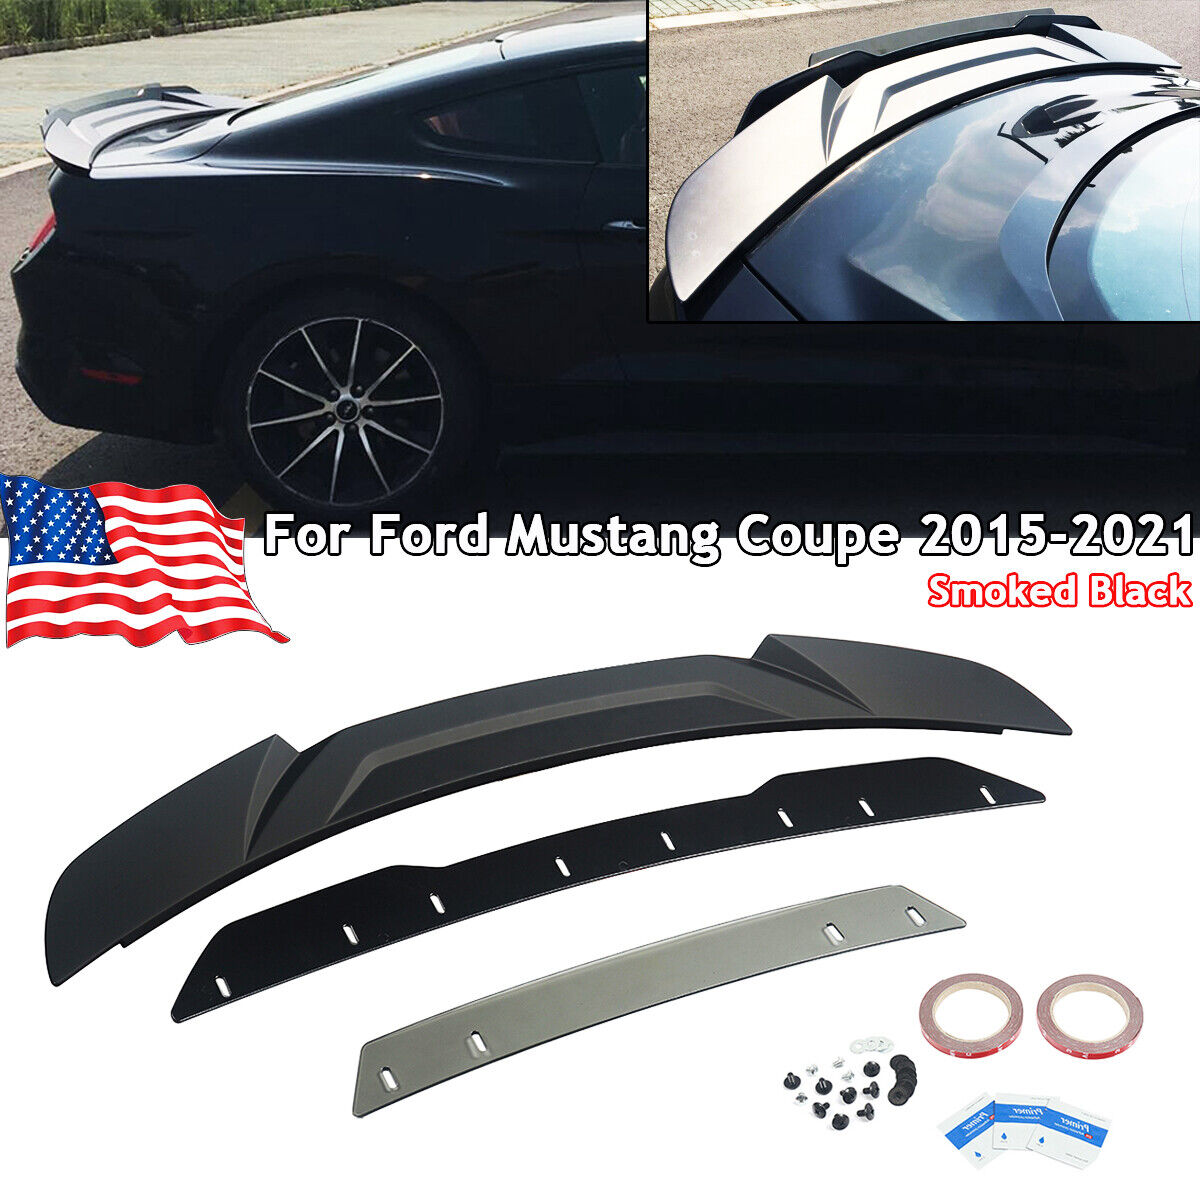 3PCS Ducktail Wicker Bill Flap Style Rear Spoiler Wing For Ford Mustang GT Coupe